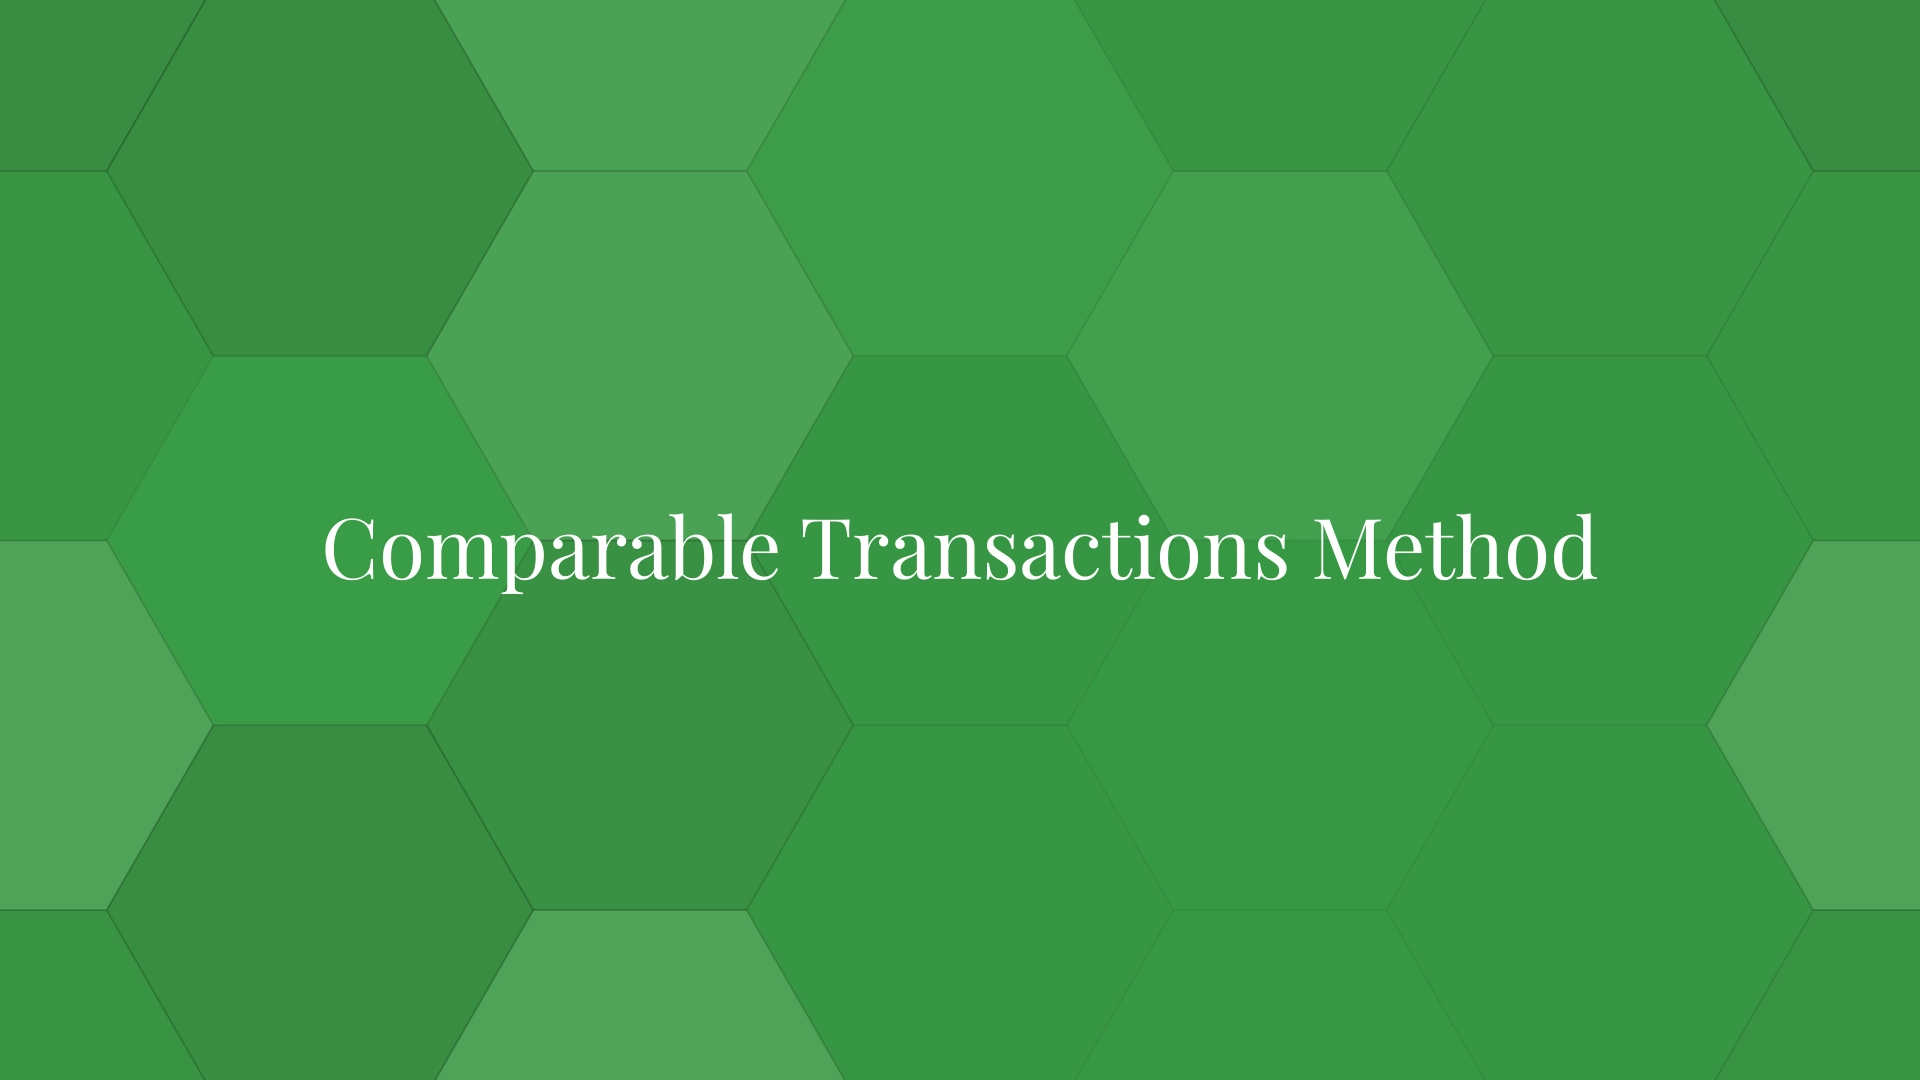 Comparable Transactions Method